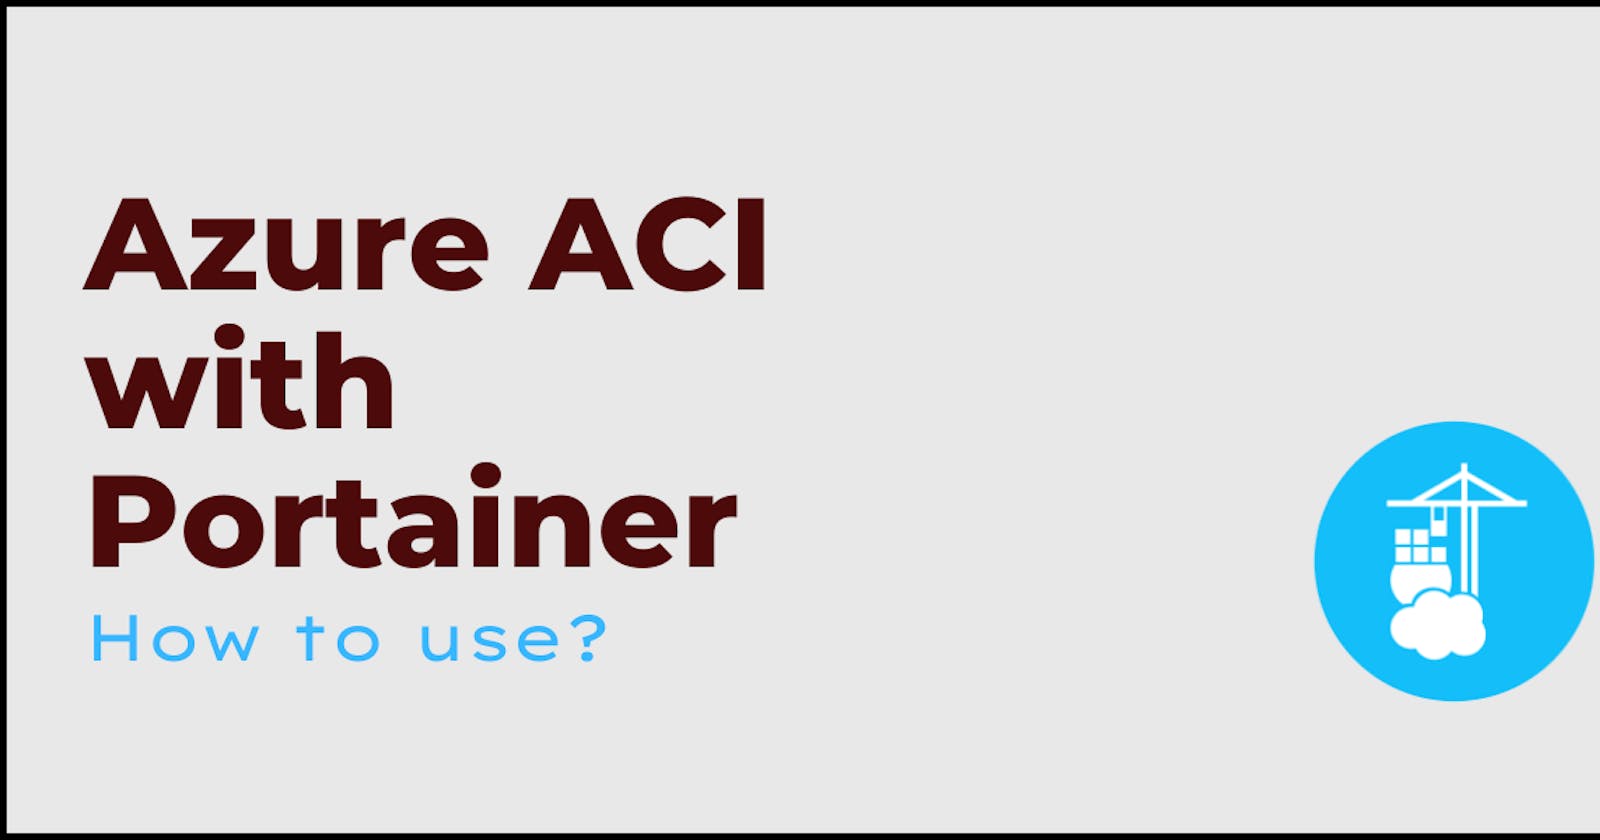 How to use Portainer to manage Azure ACI?